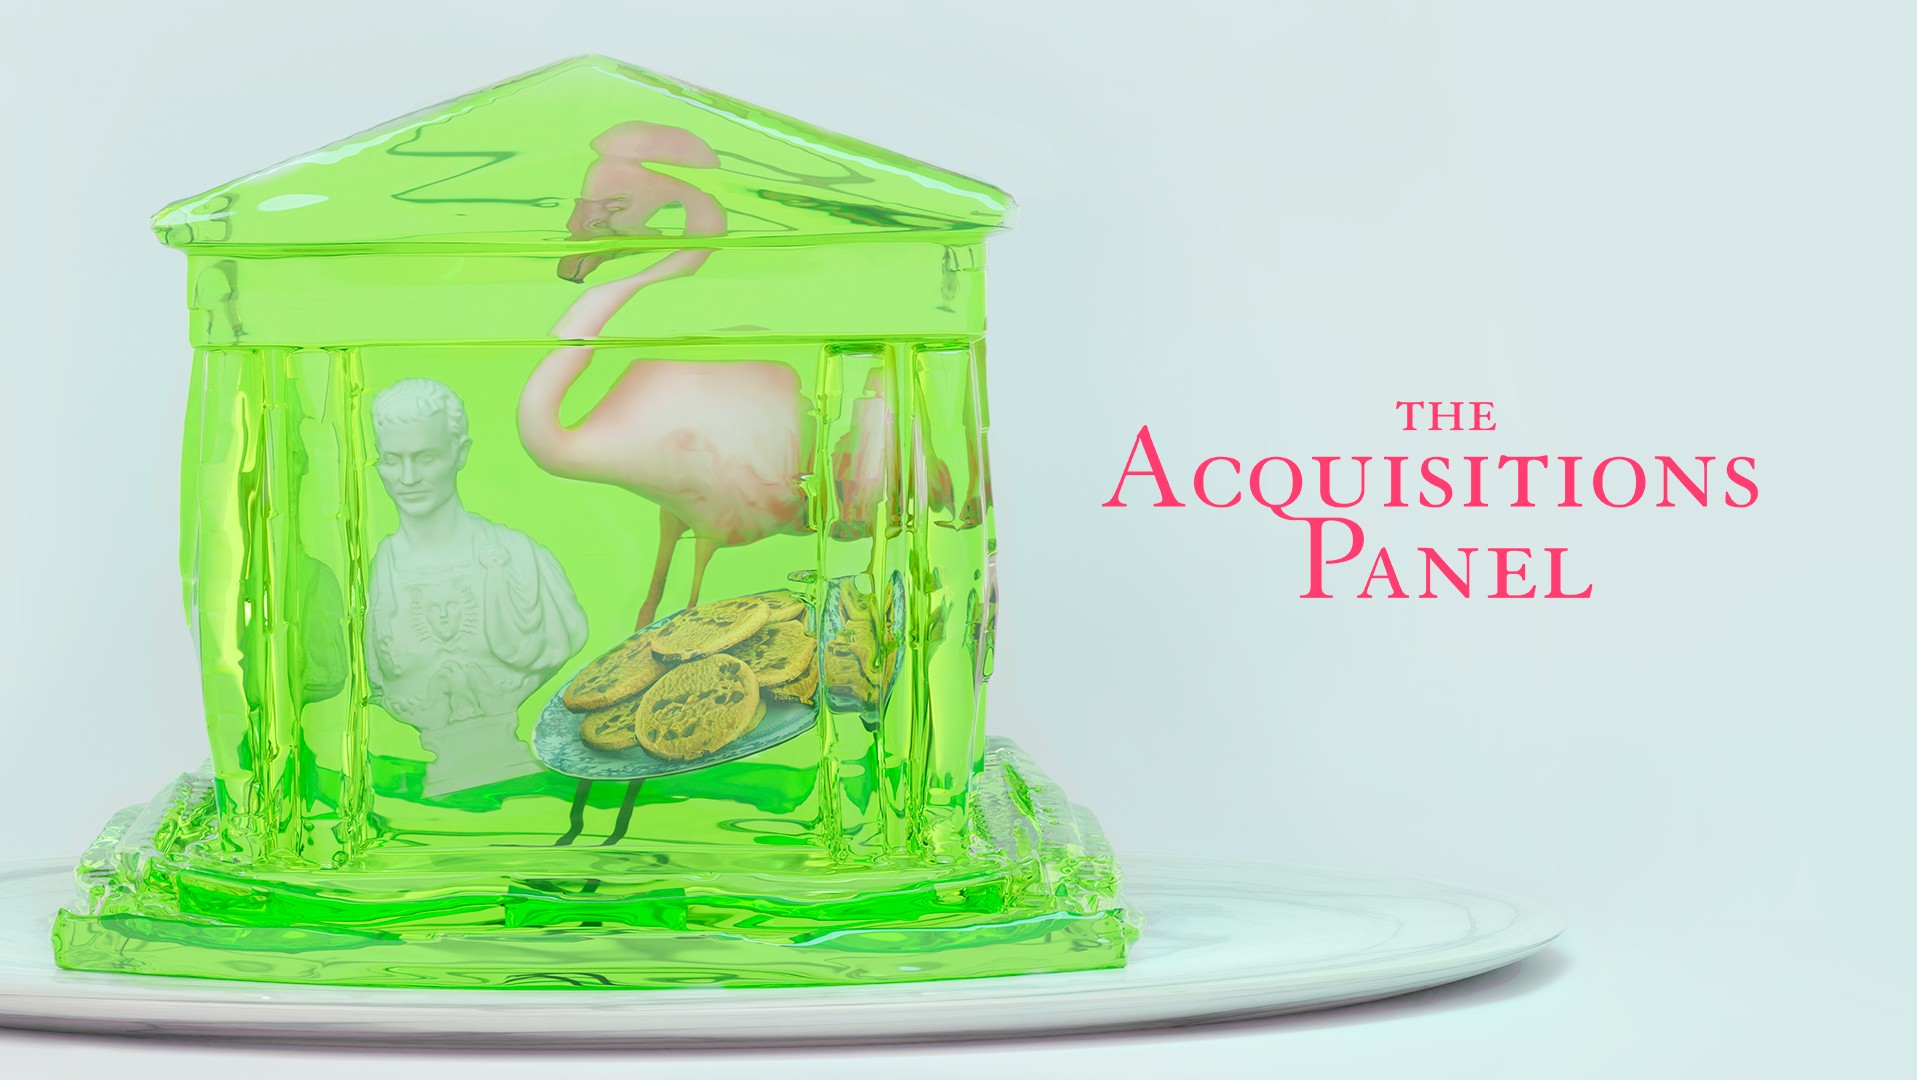 A green jelly on a white plate. The jelly contains a plate of cookies, a flamingo and a marble bust. To the right is the text 'The Acquisitions Panel' in a bold red serif font.